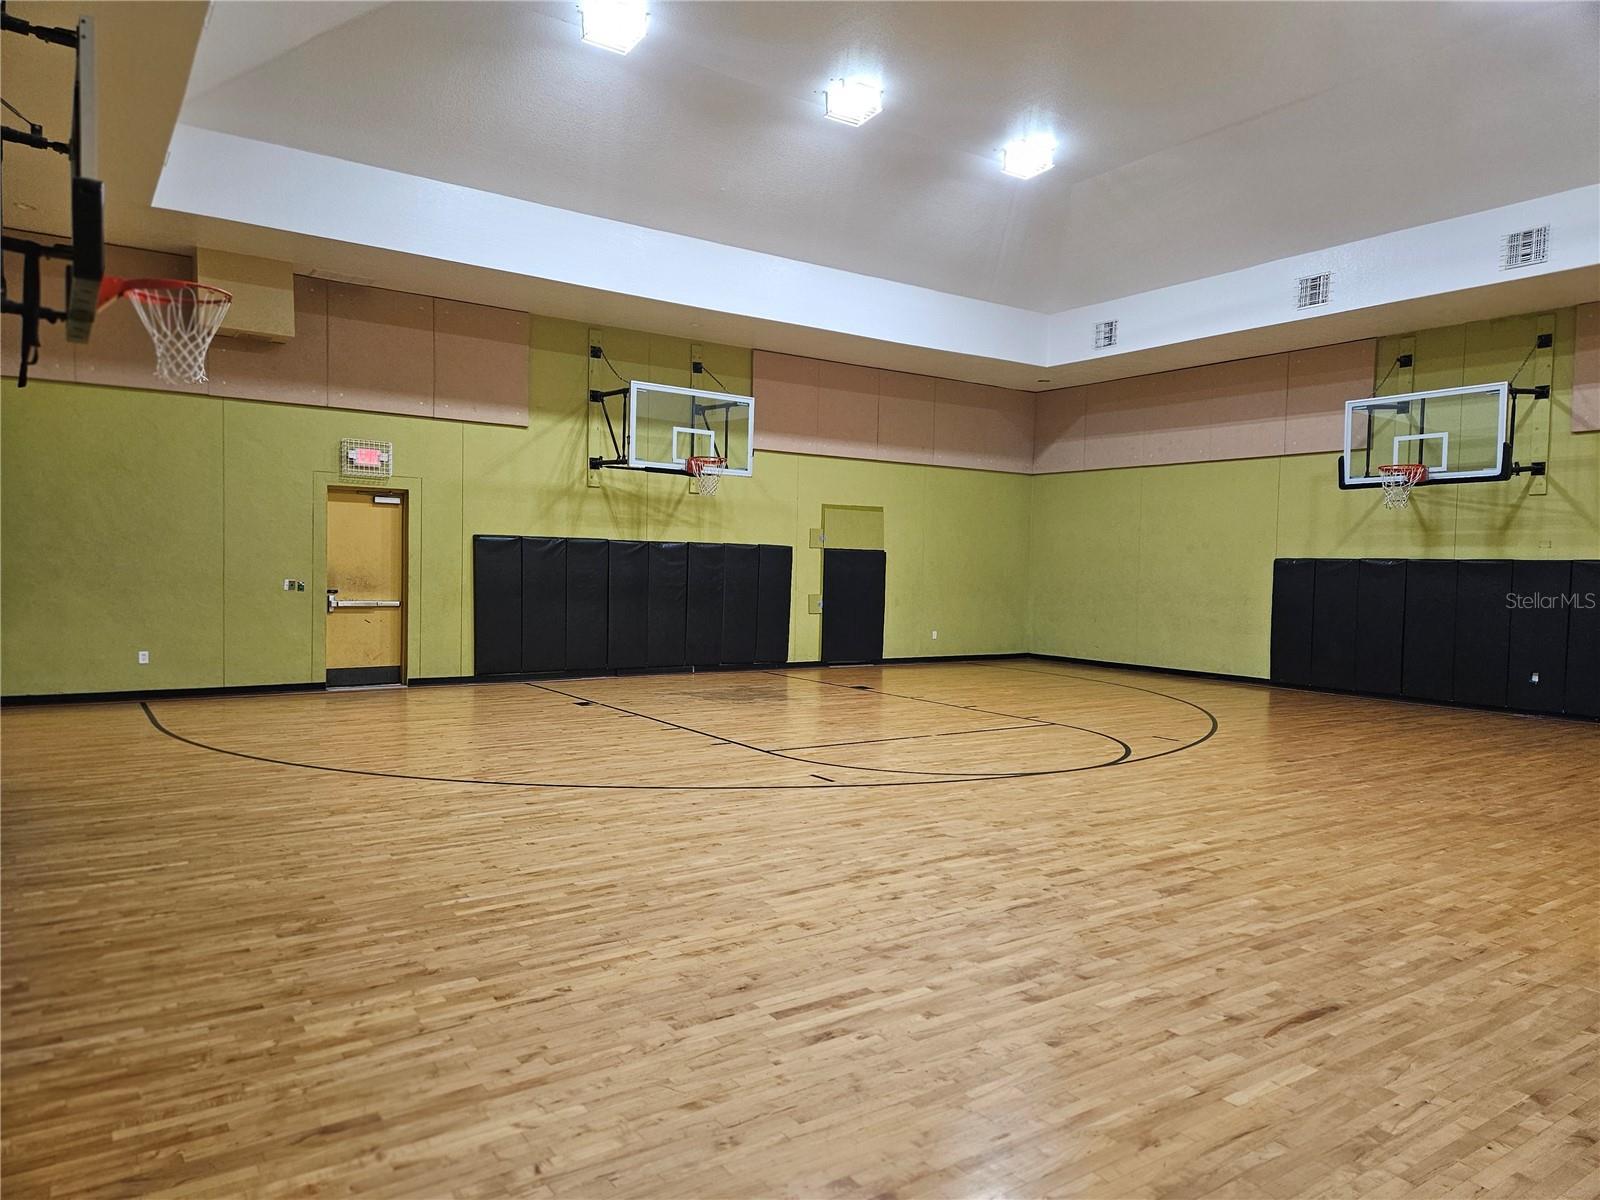 Indoor Air Conditioned Full Baseketball Court